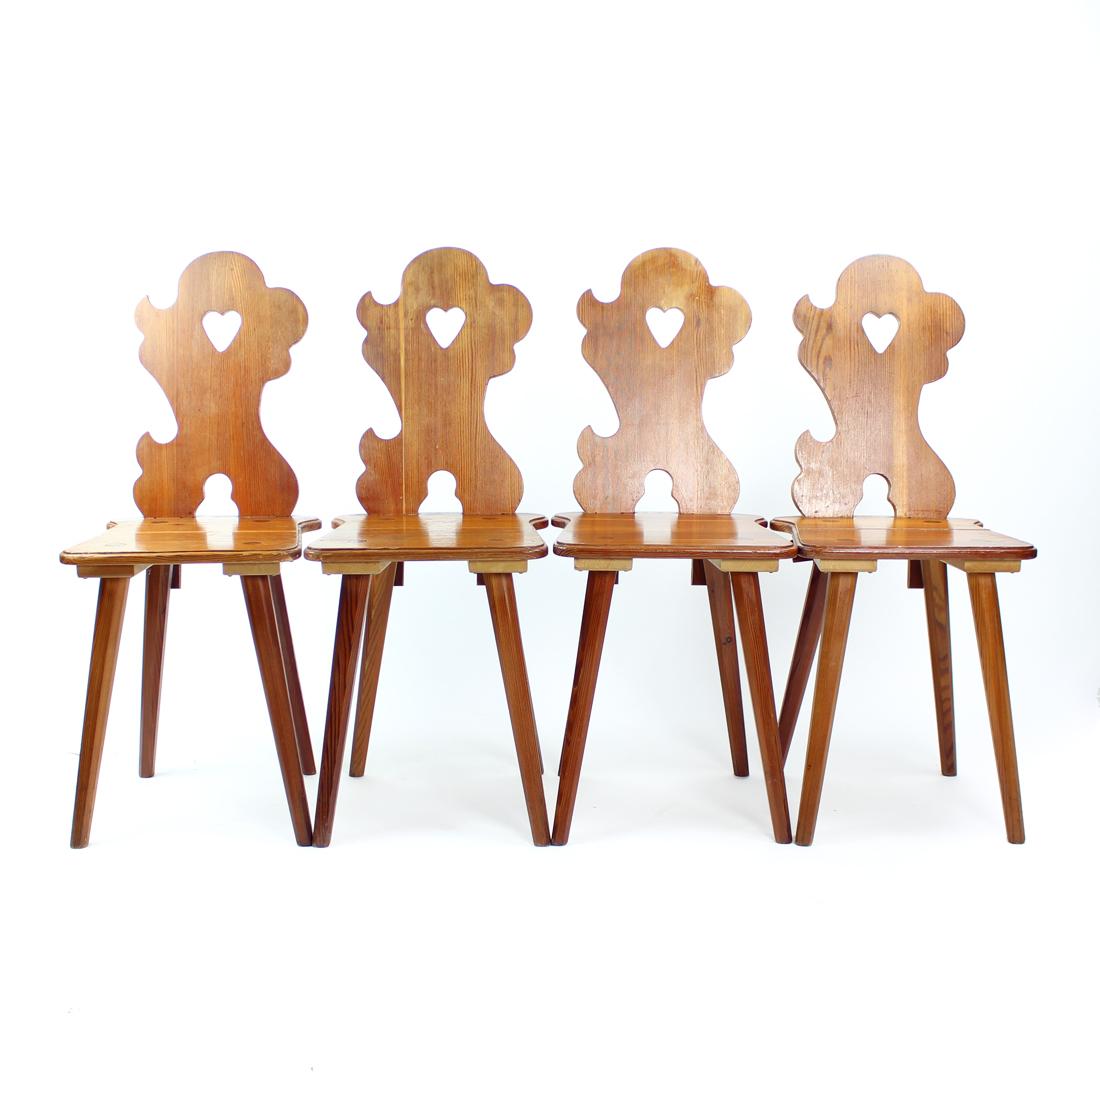 Beautiful set of four dining chairs produced in 1973 by LIPTA company in Czechoslovakia. The chairs are made of carved larch wood boards. The chairs show beautiful design originating in the Czechoslovakian folk style. There are beautiful carved